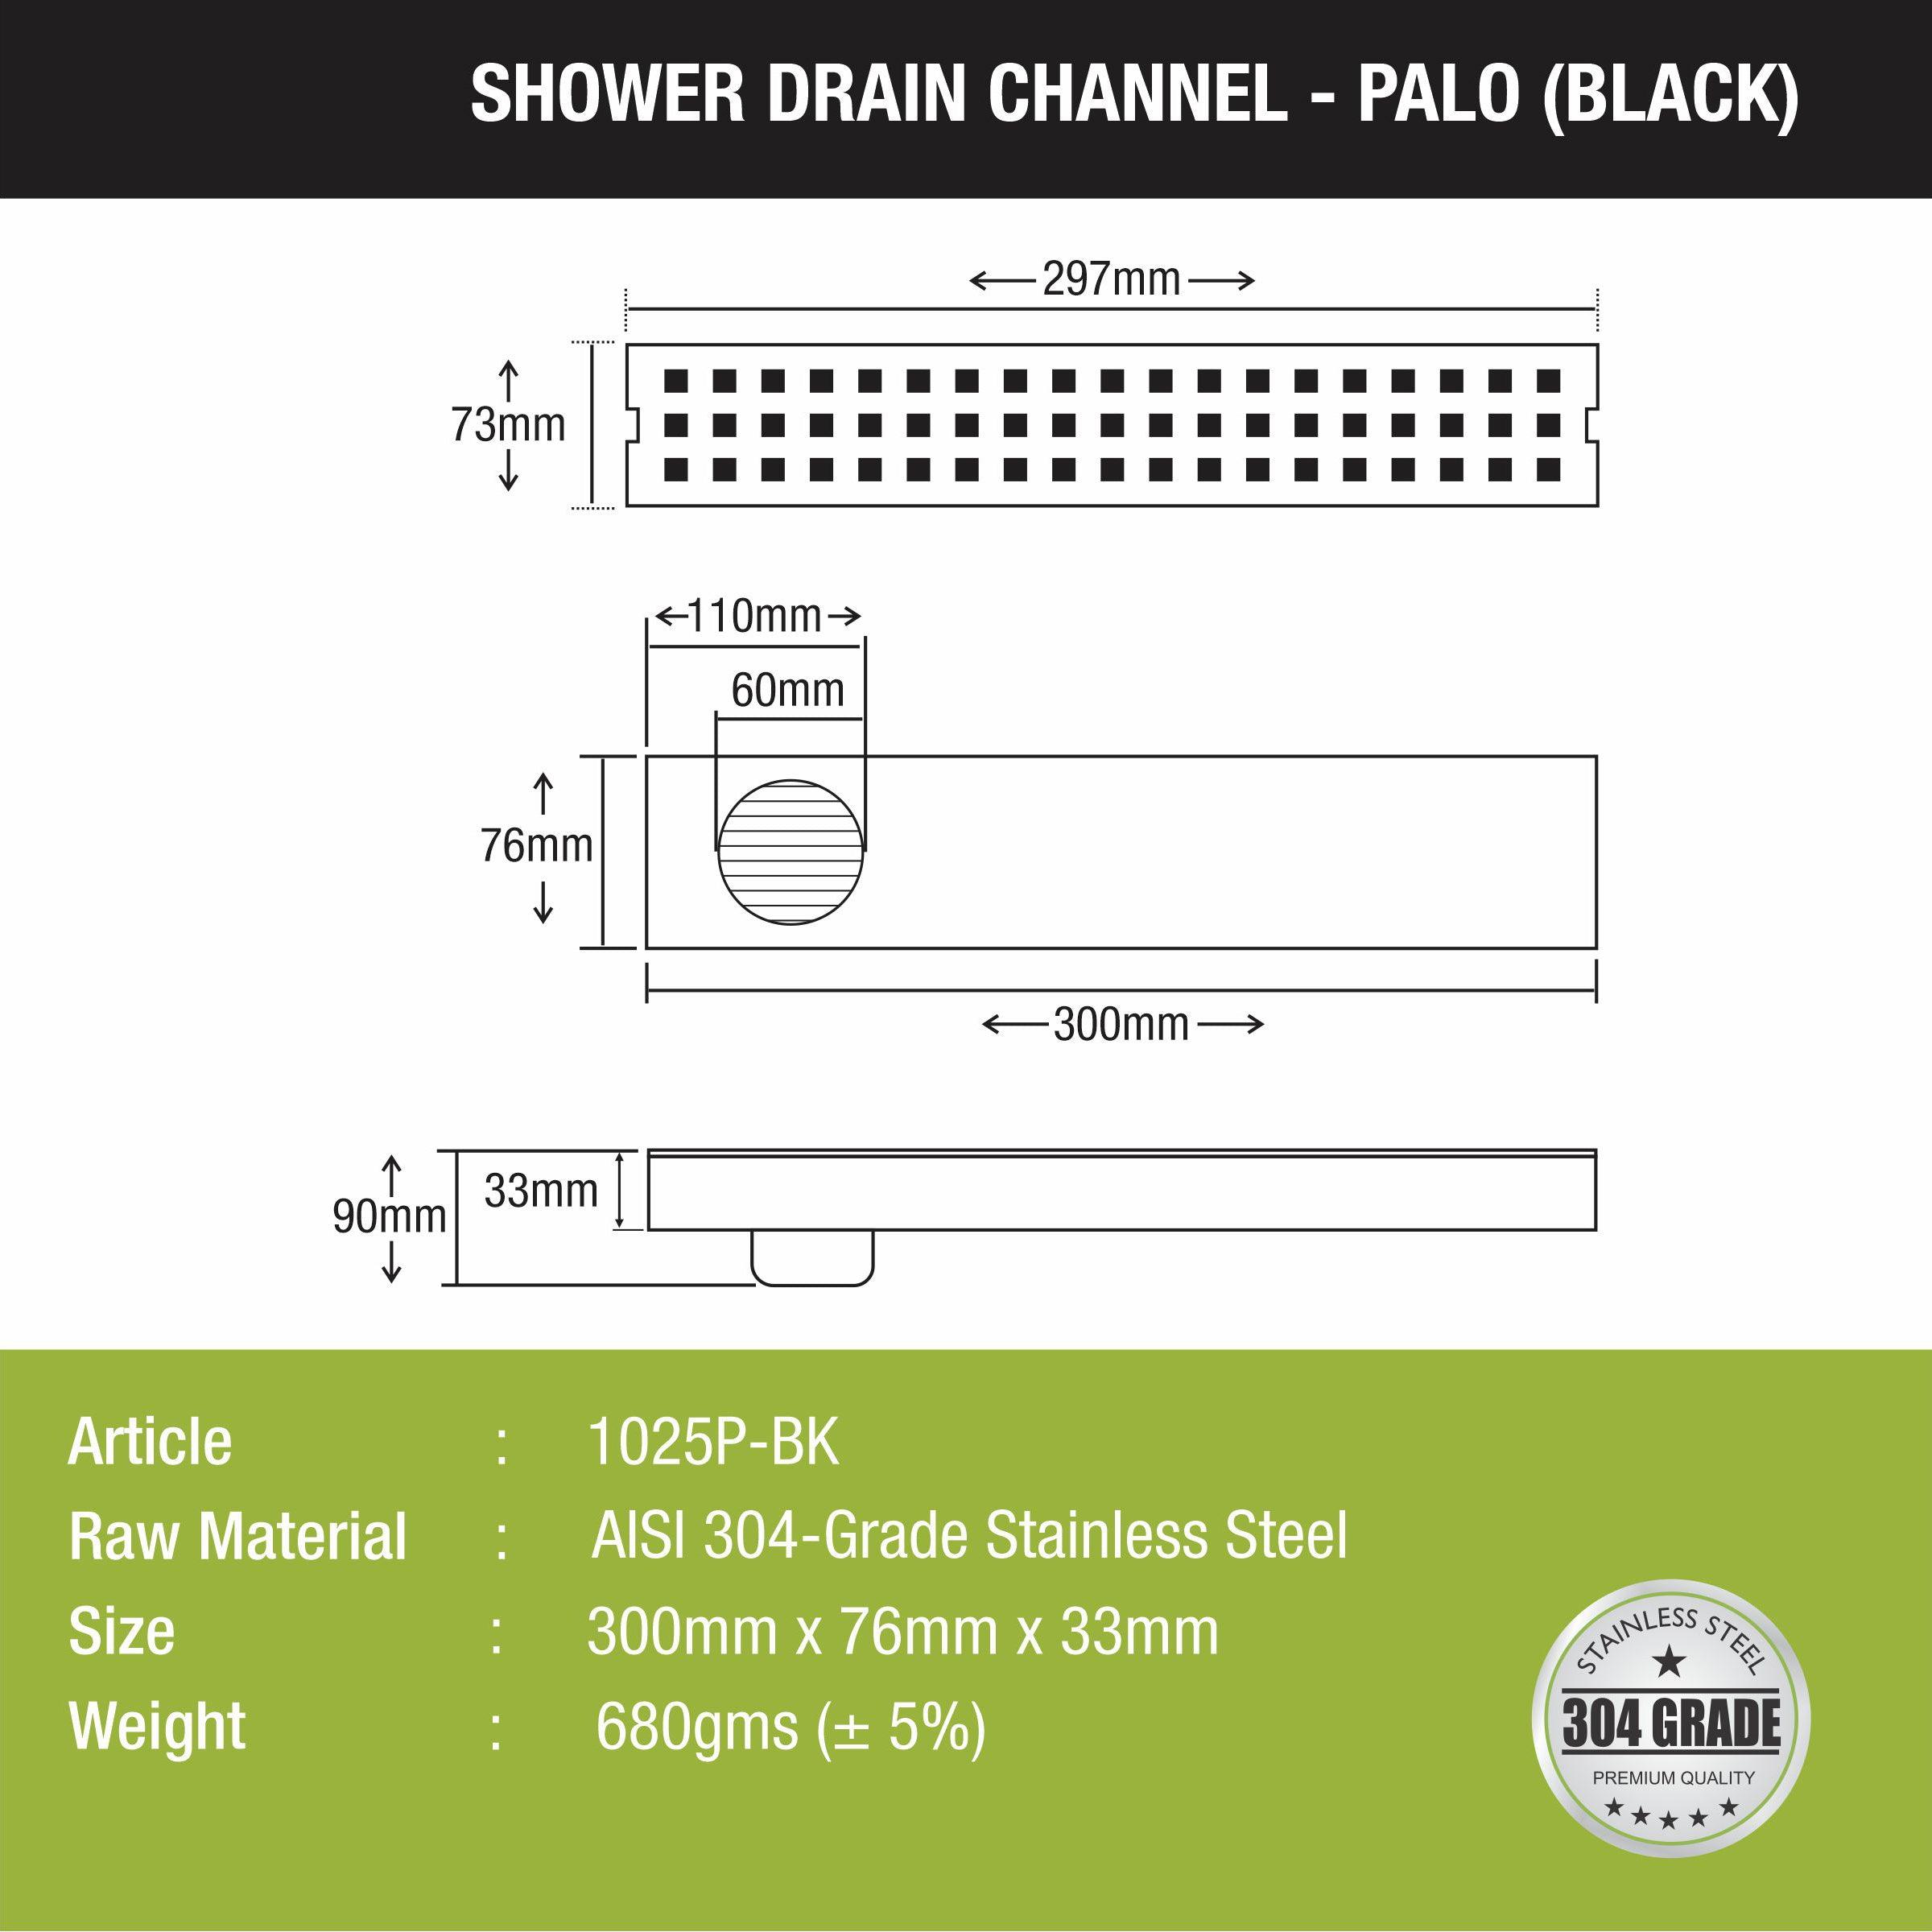 Palo Shower Drain Channel - Black (12 x 3 Inches)  size and measurement